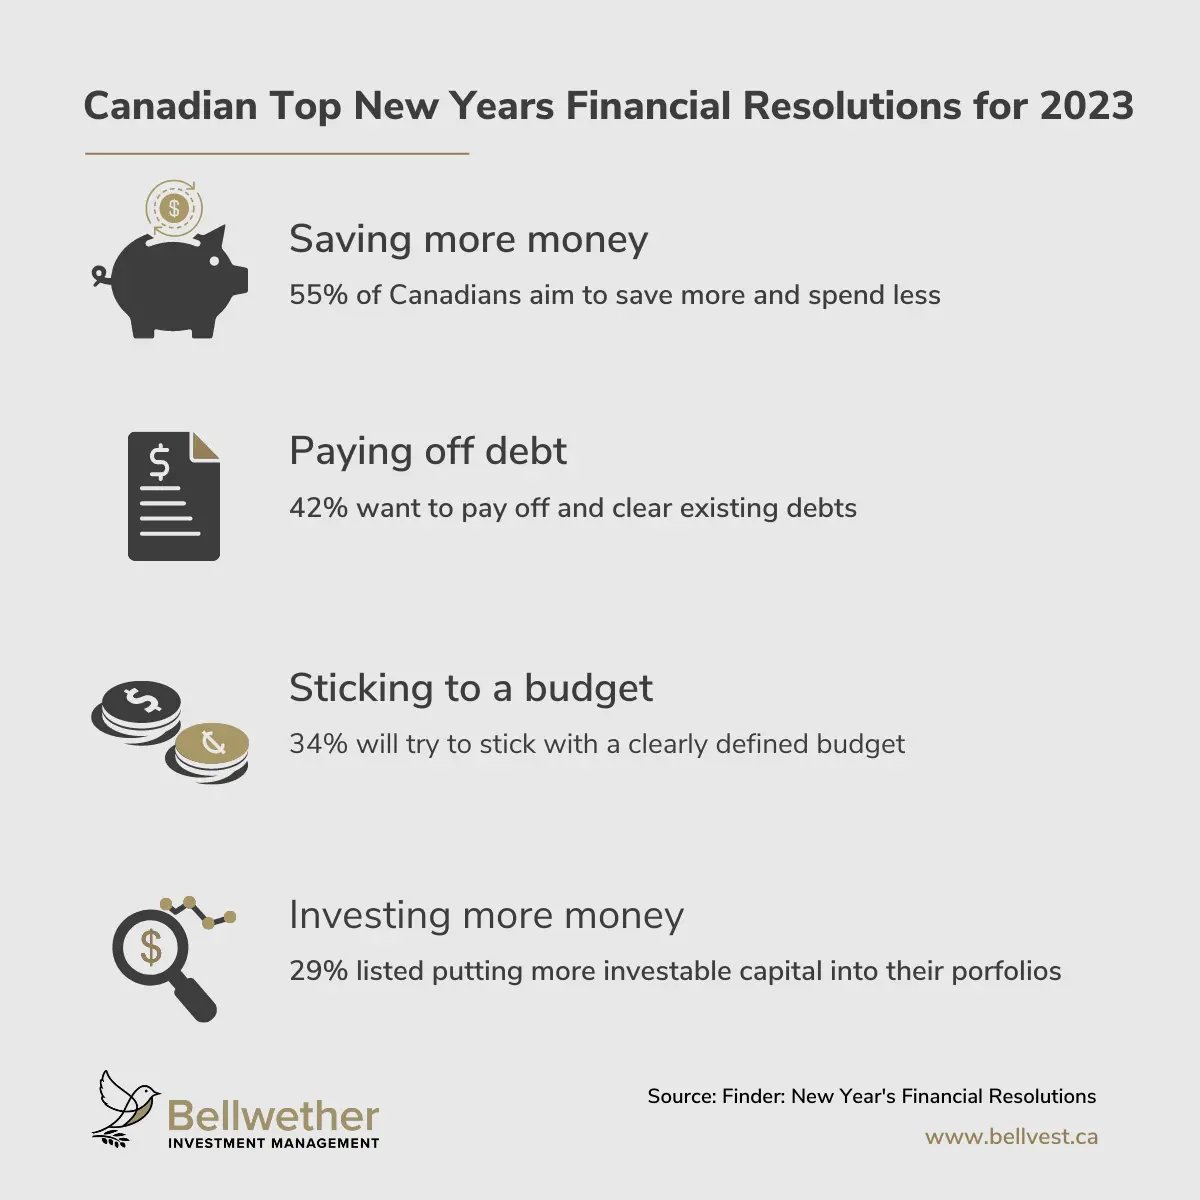 Top financial resolutions for 2023 according to a survey from Finder. Saving more money, paying off debt, sticking to a budget, and investing more money are the top 4 goals.